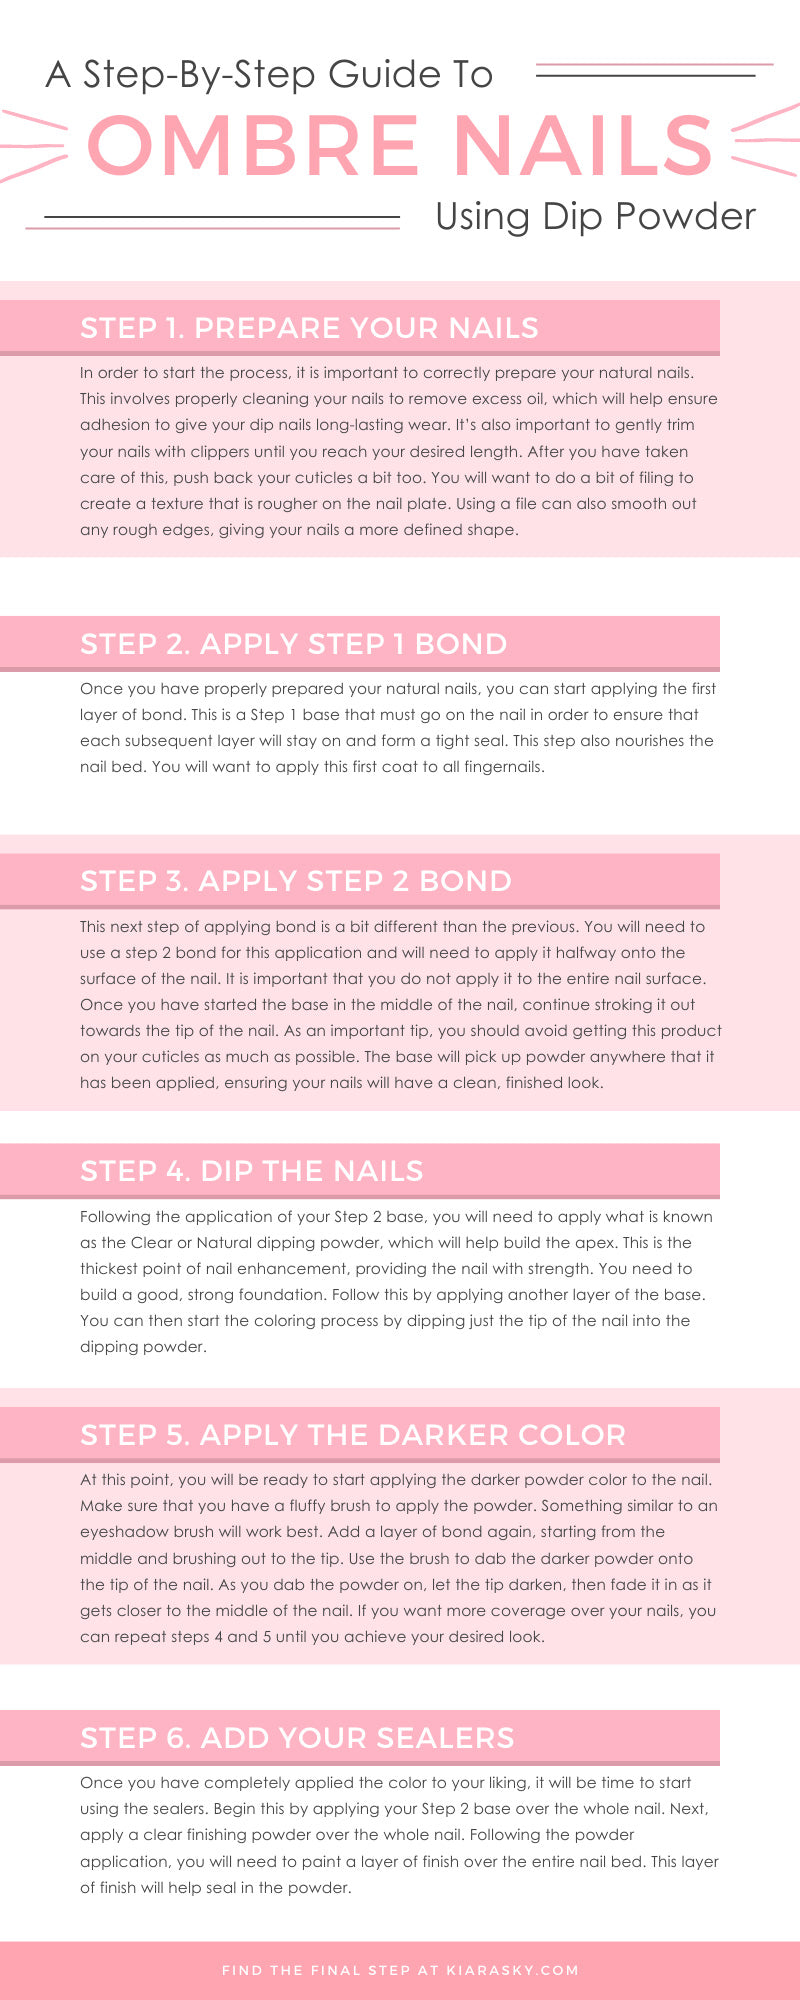 A Step-By-Step Guide To Ombre Nails Using Dip Powder